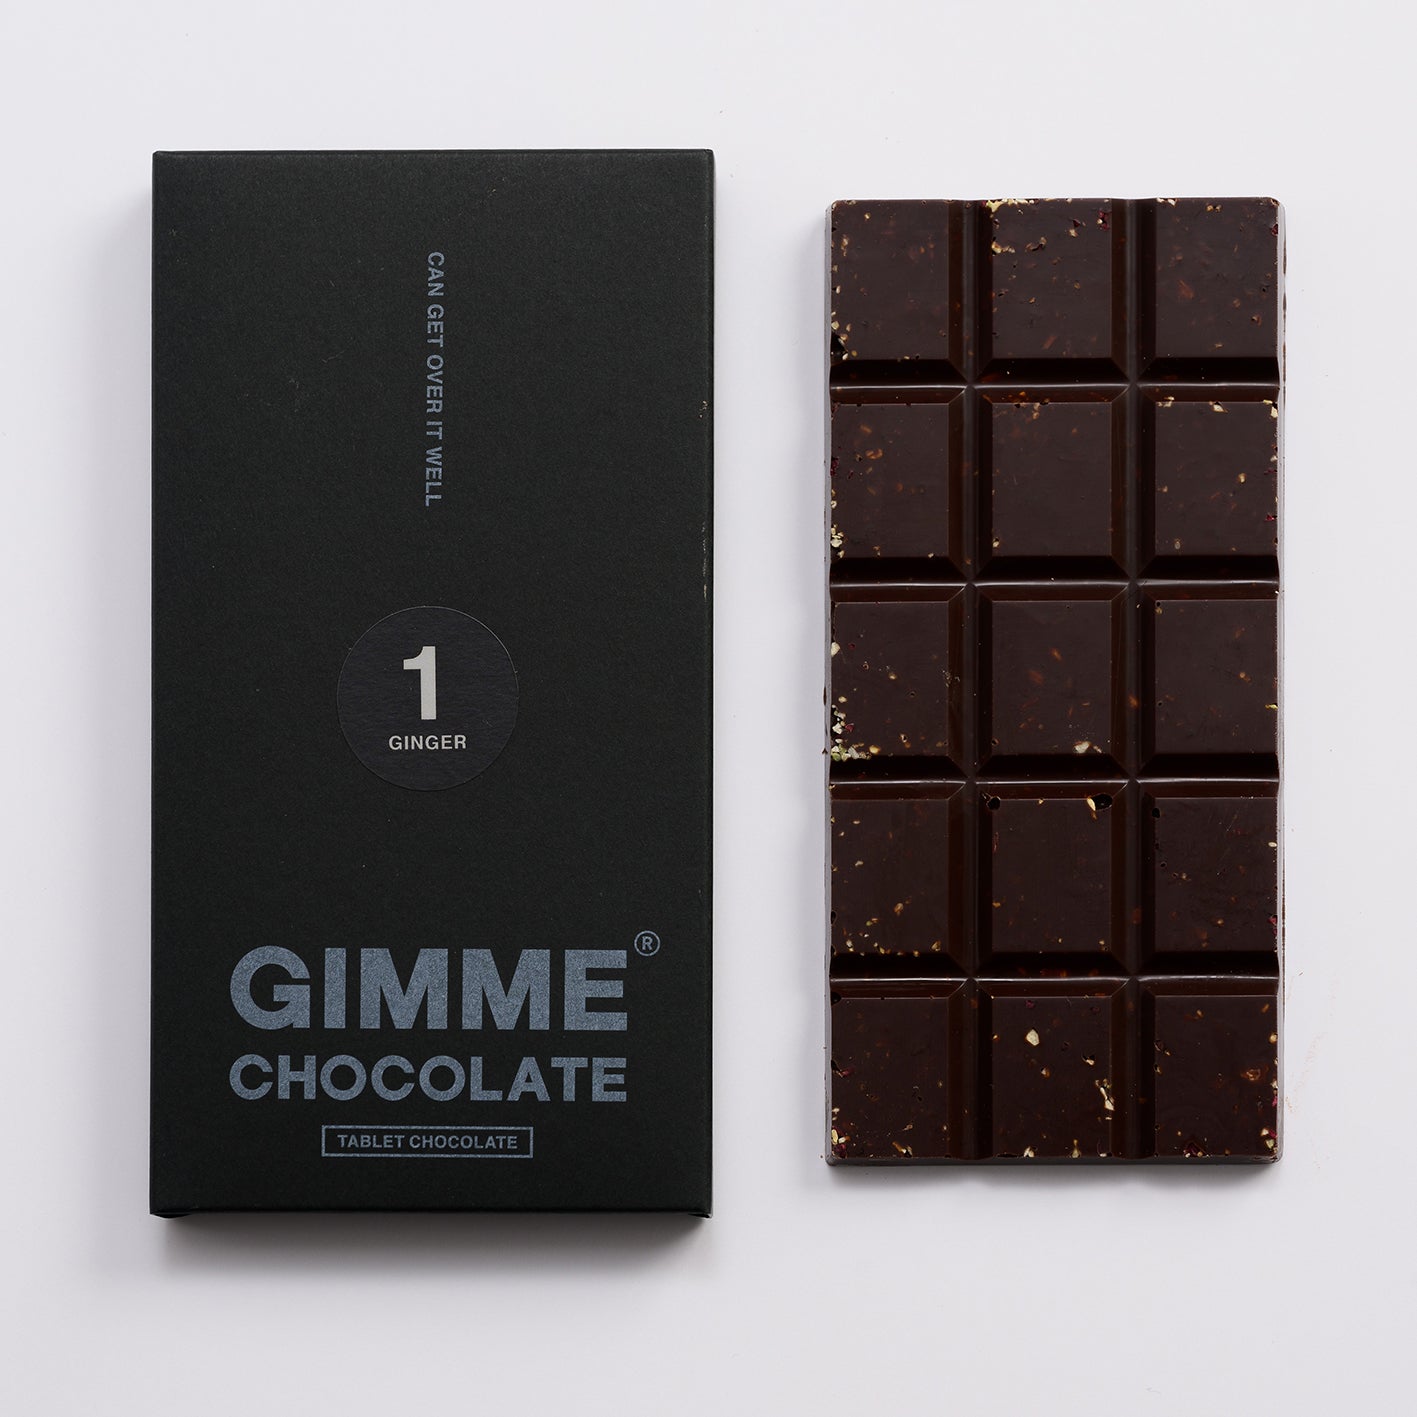 GIMME CHOCOLATE"GINGER" 50g